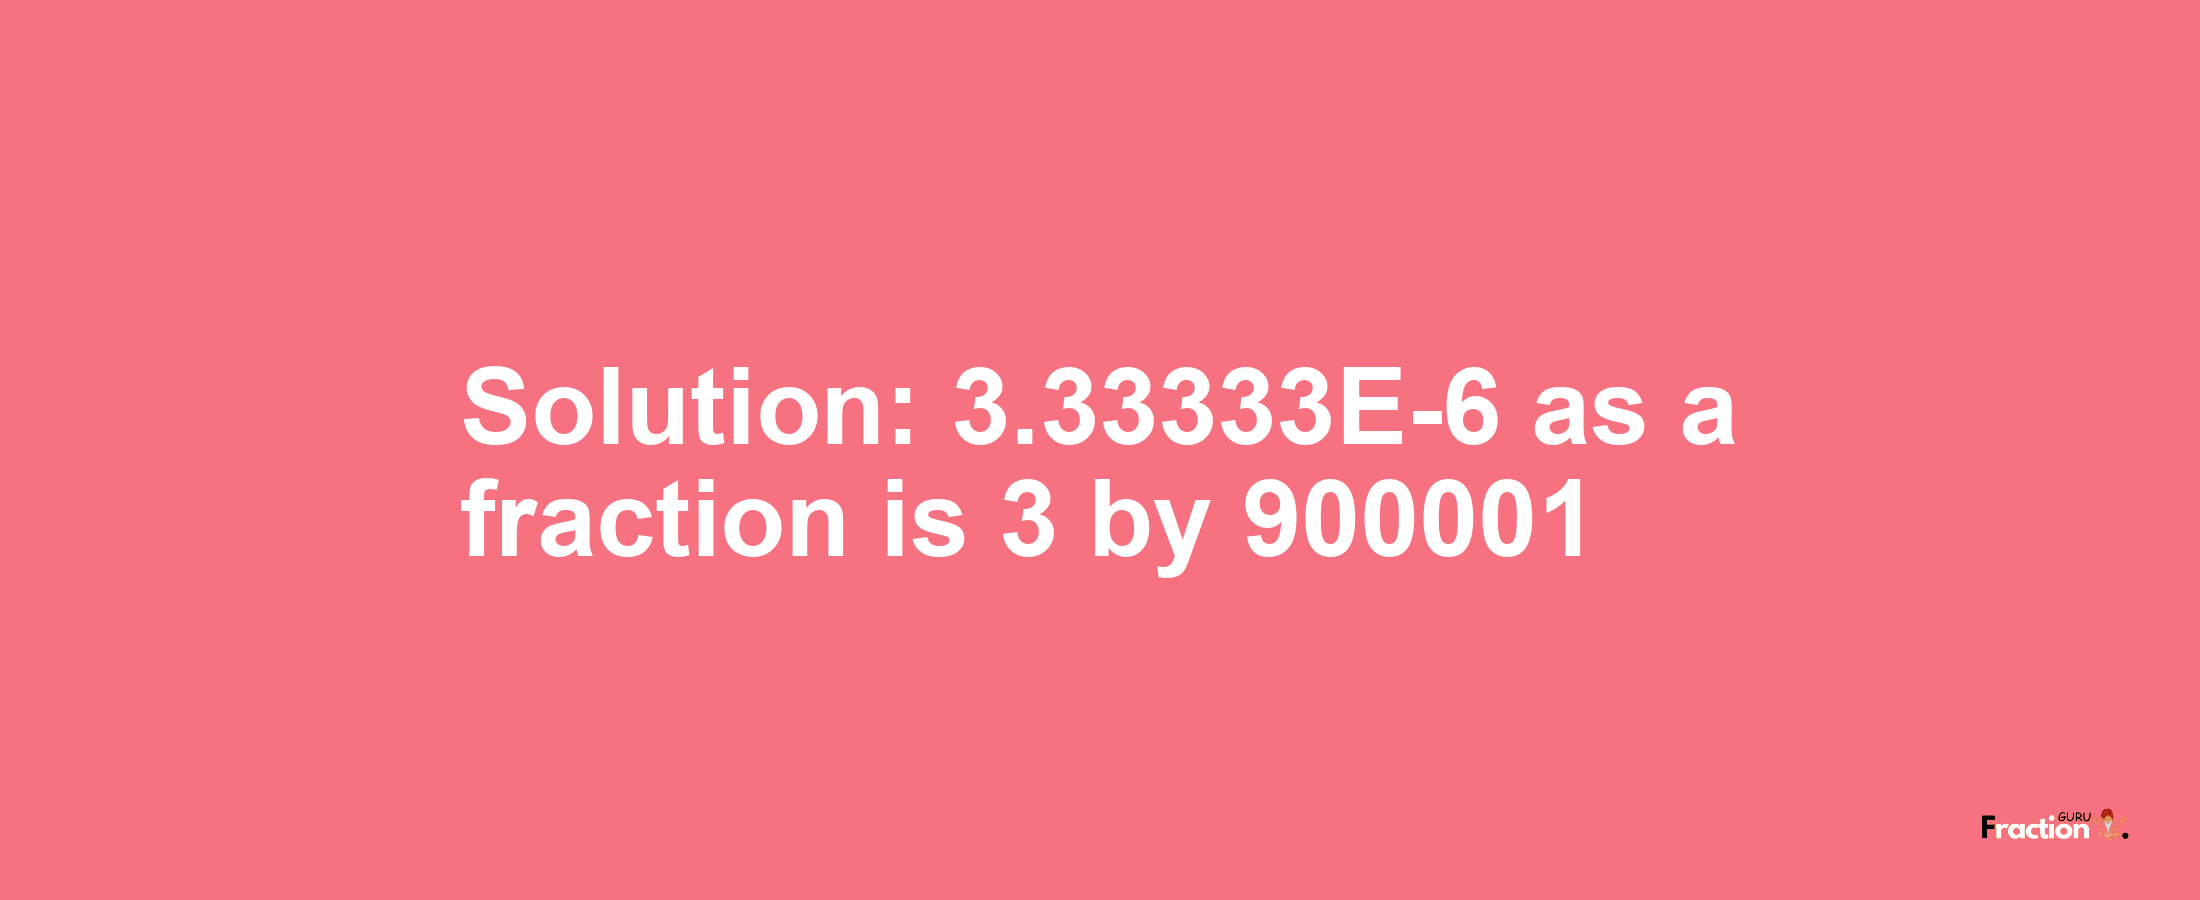 Solution:3.33333E-6 as a fraction is 3/900001